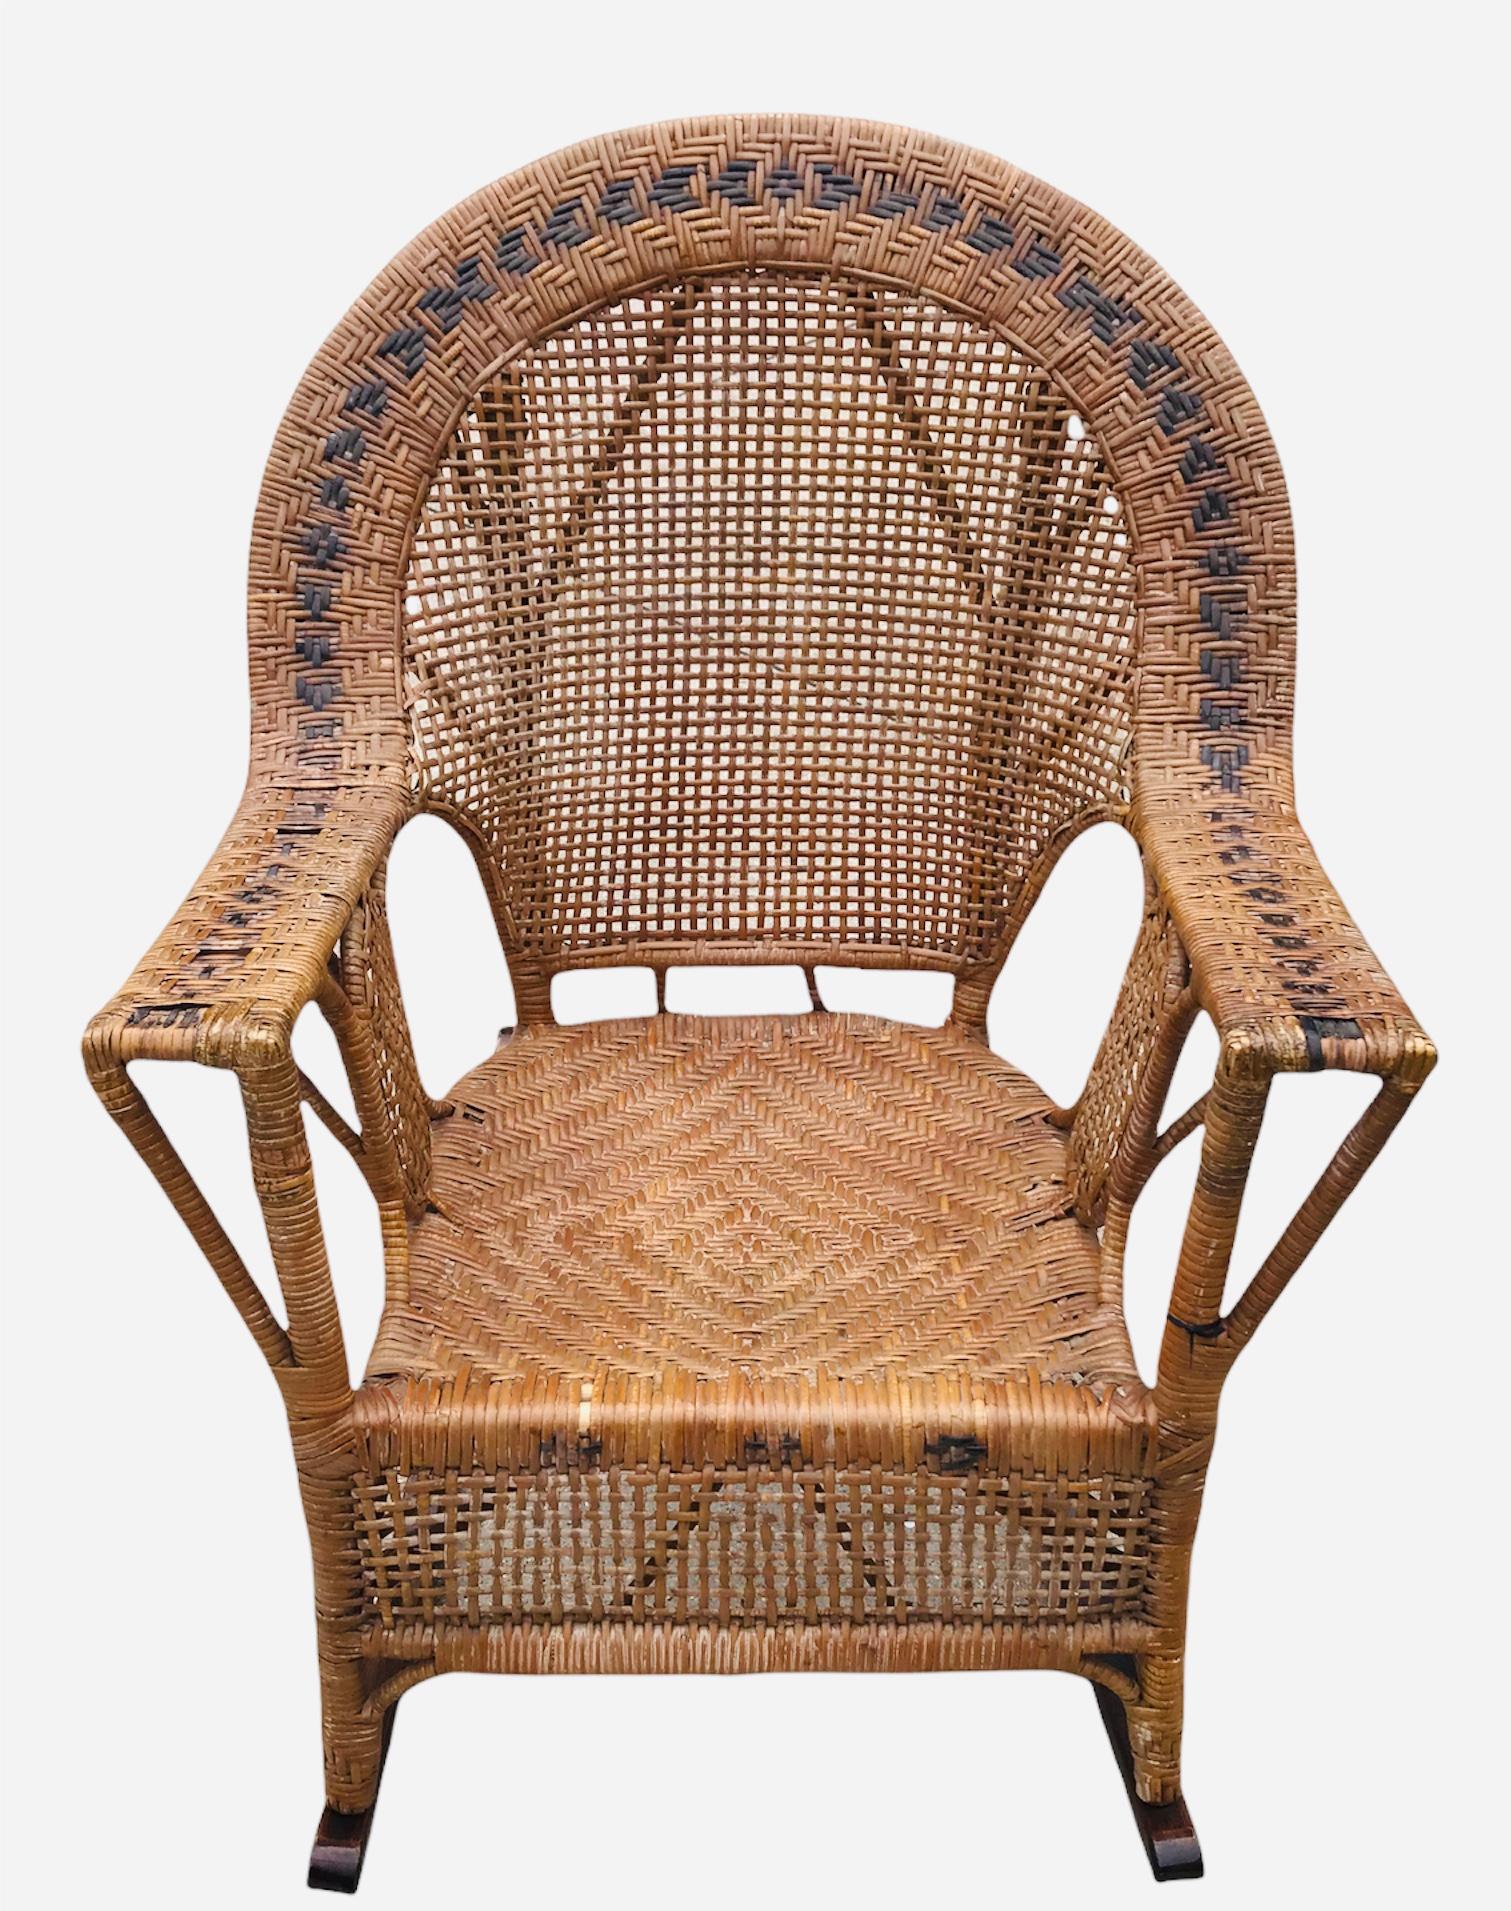 Such a spectacular woven cane Mid-Century Modern rocking chair. Minimalistic in design with unique character of the black herringbone-like design arched around the top back area of chair.